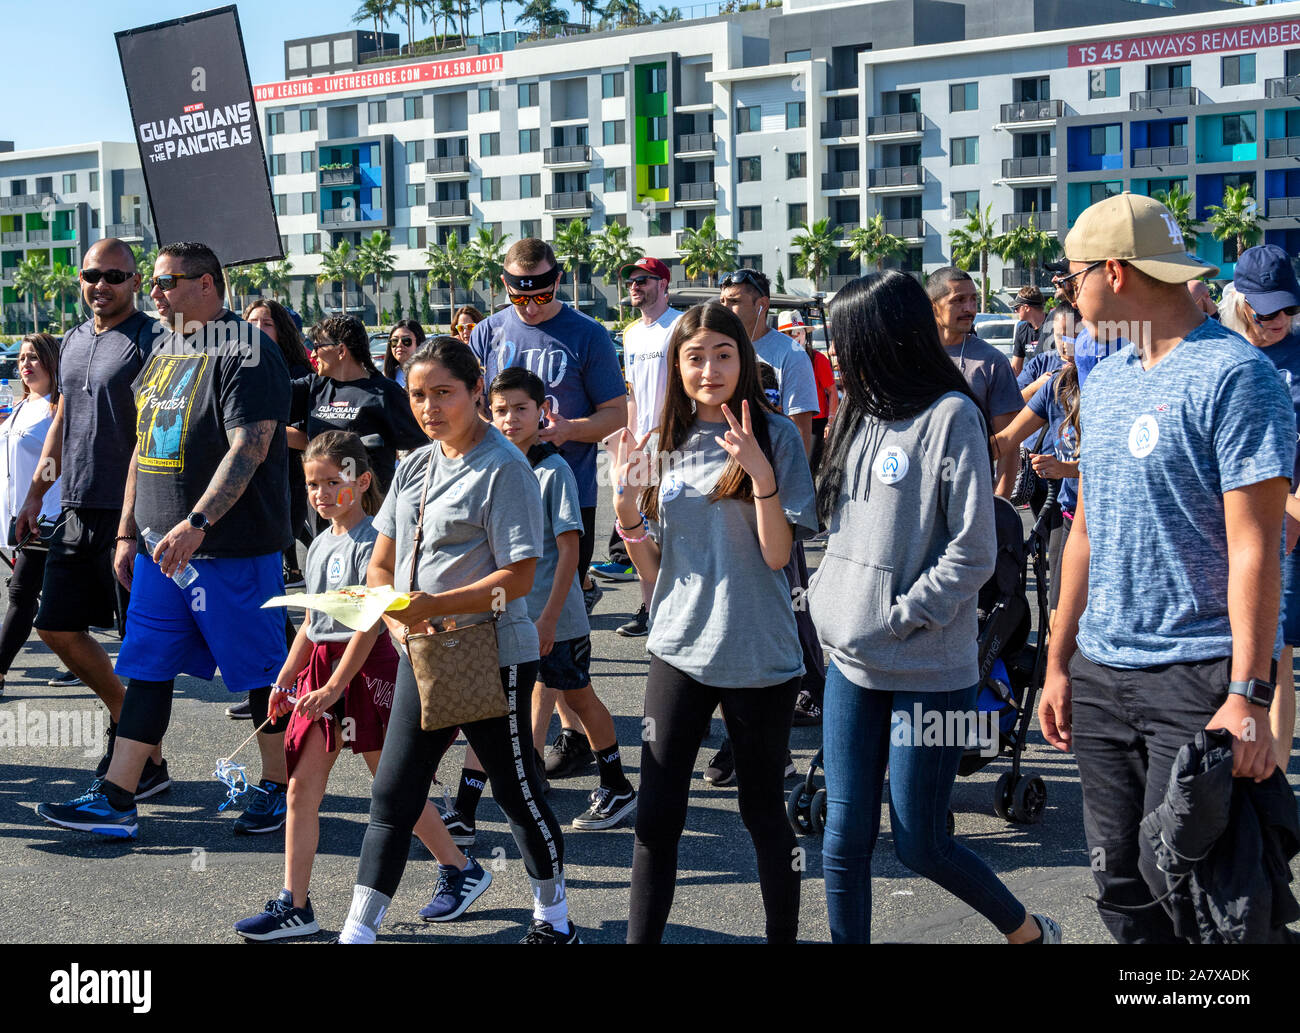 Anaheim, CA / USA - Crowd of people from diverse backgrounds start the walk for a common cause at the 2019 JDRF One Walk fundraiser for Type 1 diabetes. Stock Photo